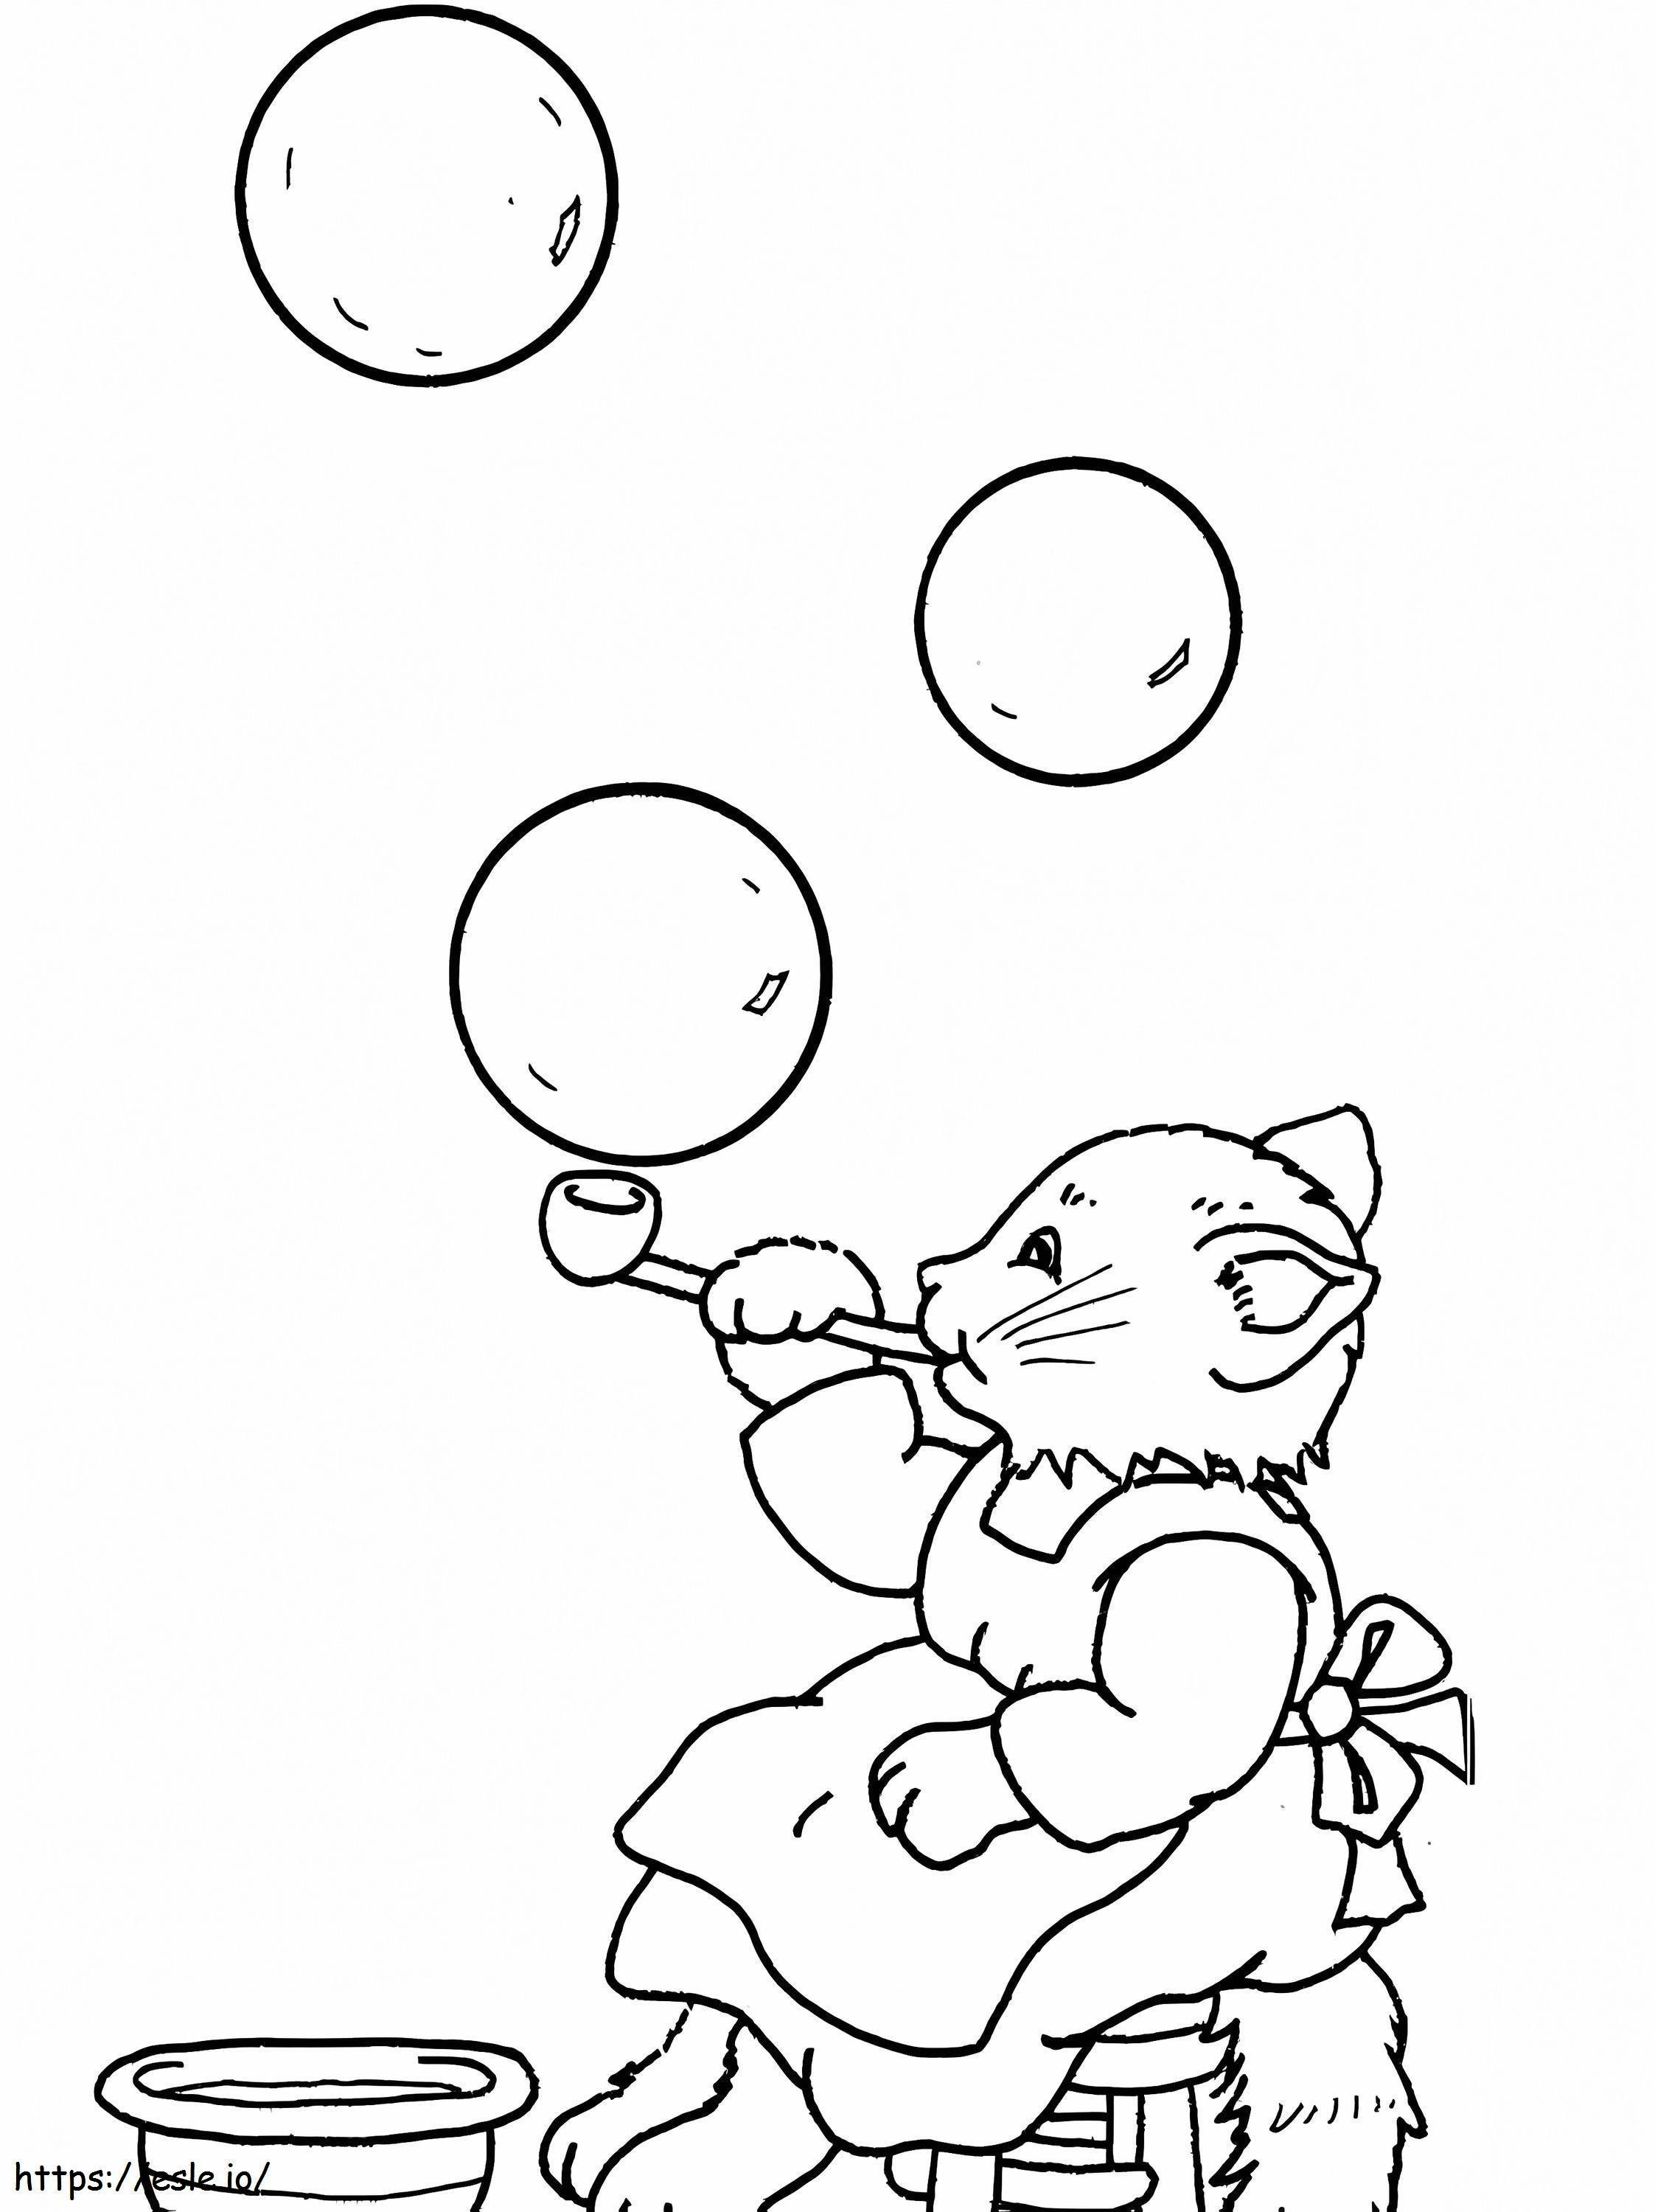 Cat And Bubbles coloring page